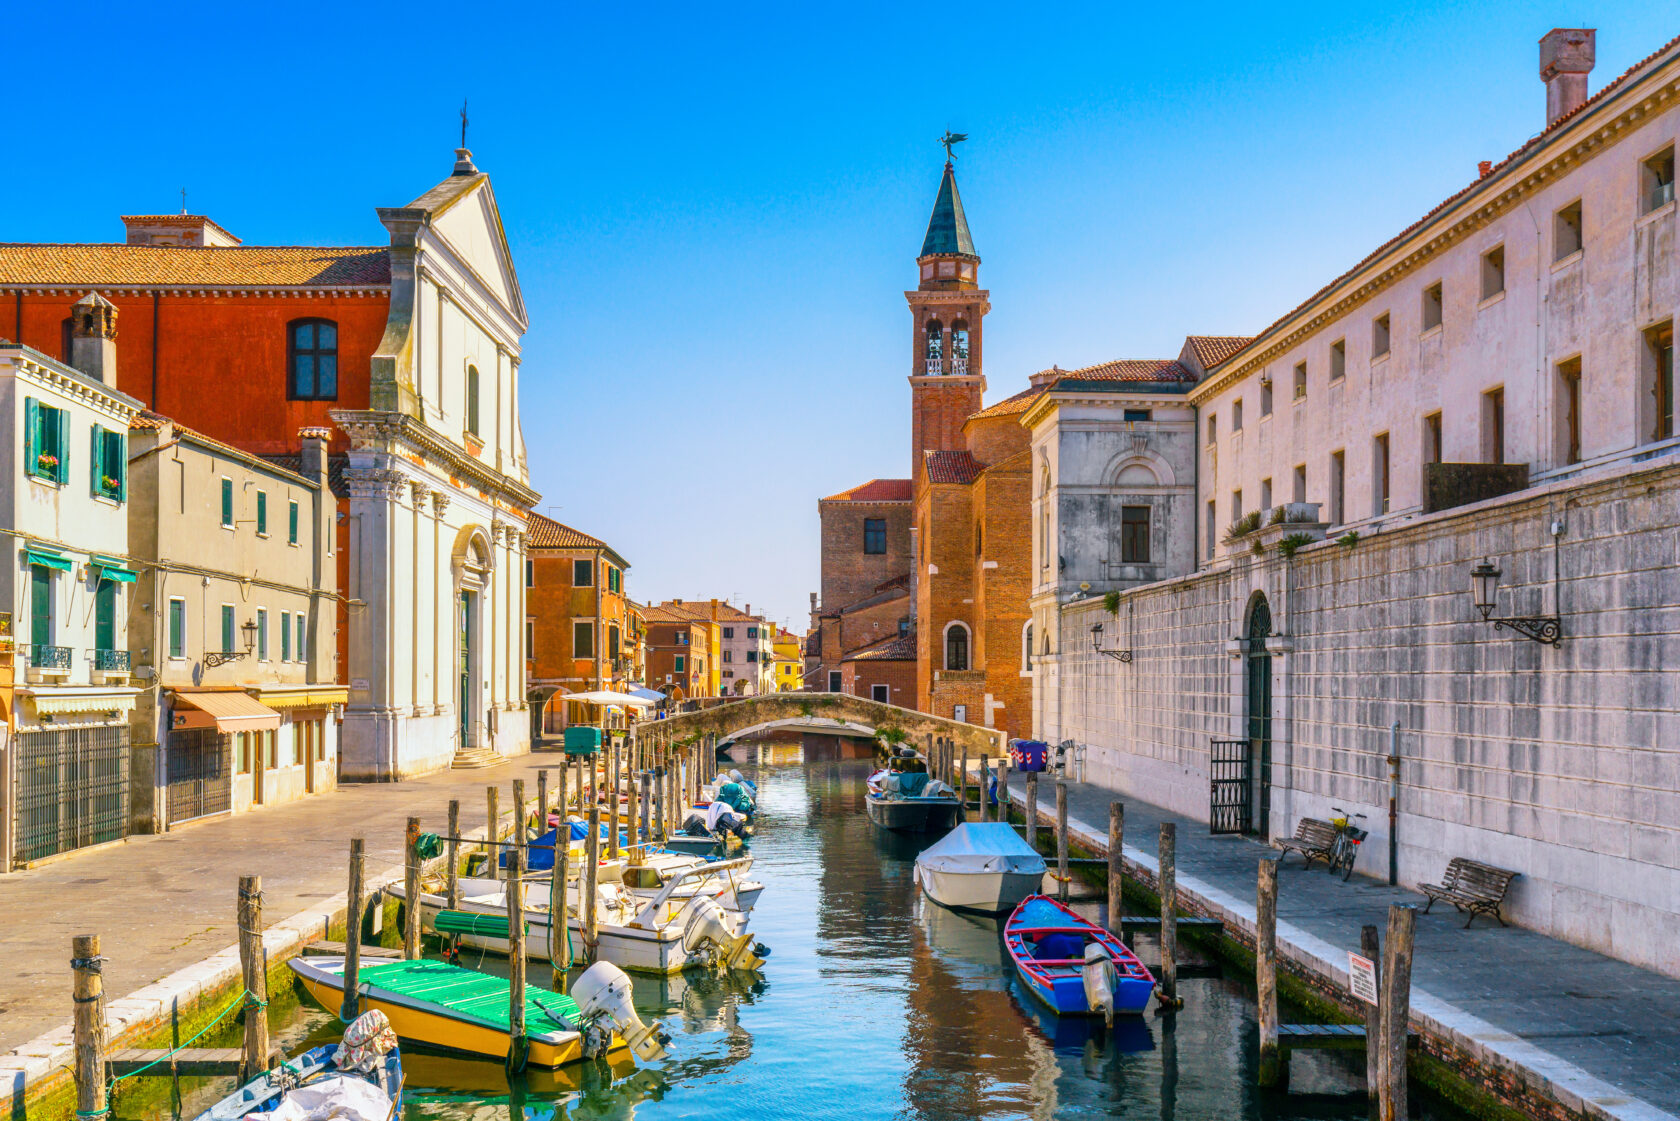 A view of a water canal and church in Chioggia, Italy, a town in the Venetian Lagoon (an Atlantis site).